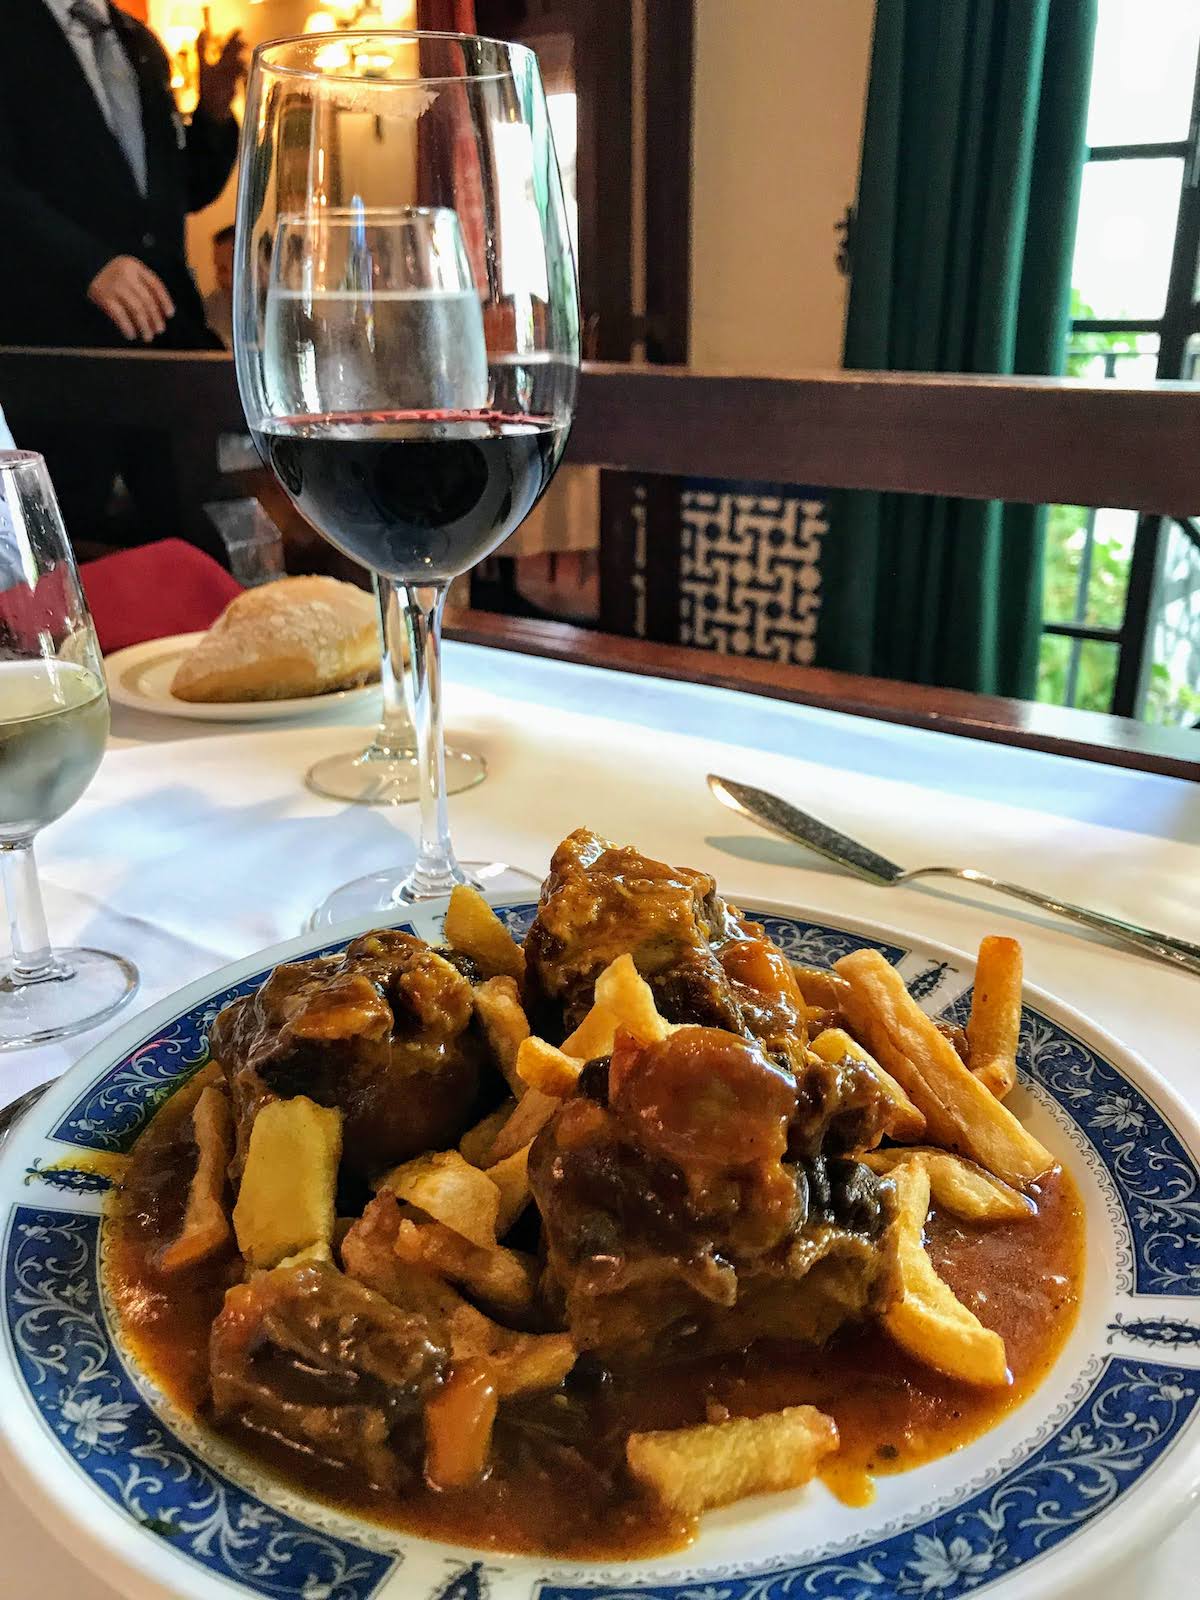 Plate of bull tail stew with french fries next to a glass of red wine.